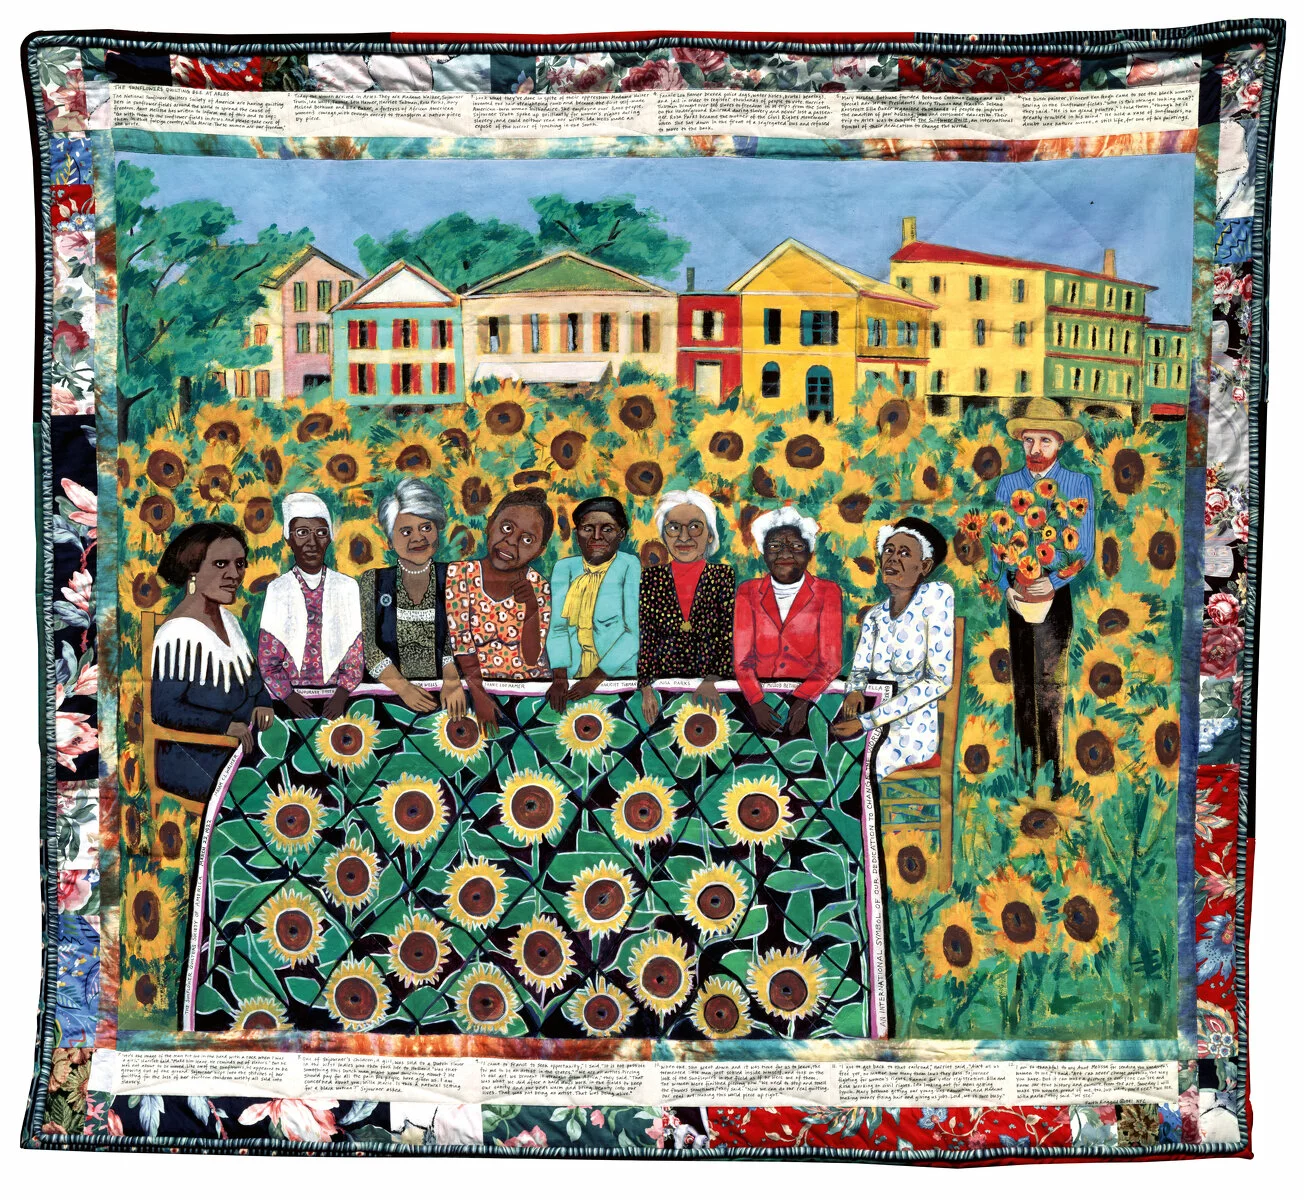 Faith Ringgold (b. 1930, New York, NY), <em>The French Collection Part I, #4: The Sunflowers Quilting Bee at Arles</em>, 1991. Acrylic on canvas with pieced fabric border; 74 × 80 in. (188 × 203.2 cm). Private collection. © 2023 Faith Ringgold / Artists Rights Society (ARS), New York. 2023/08/P6422-0185-1.jpg 